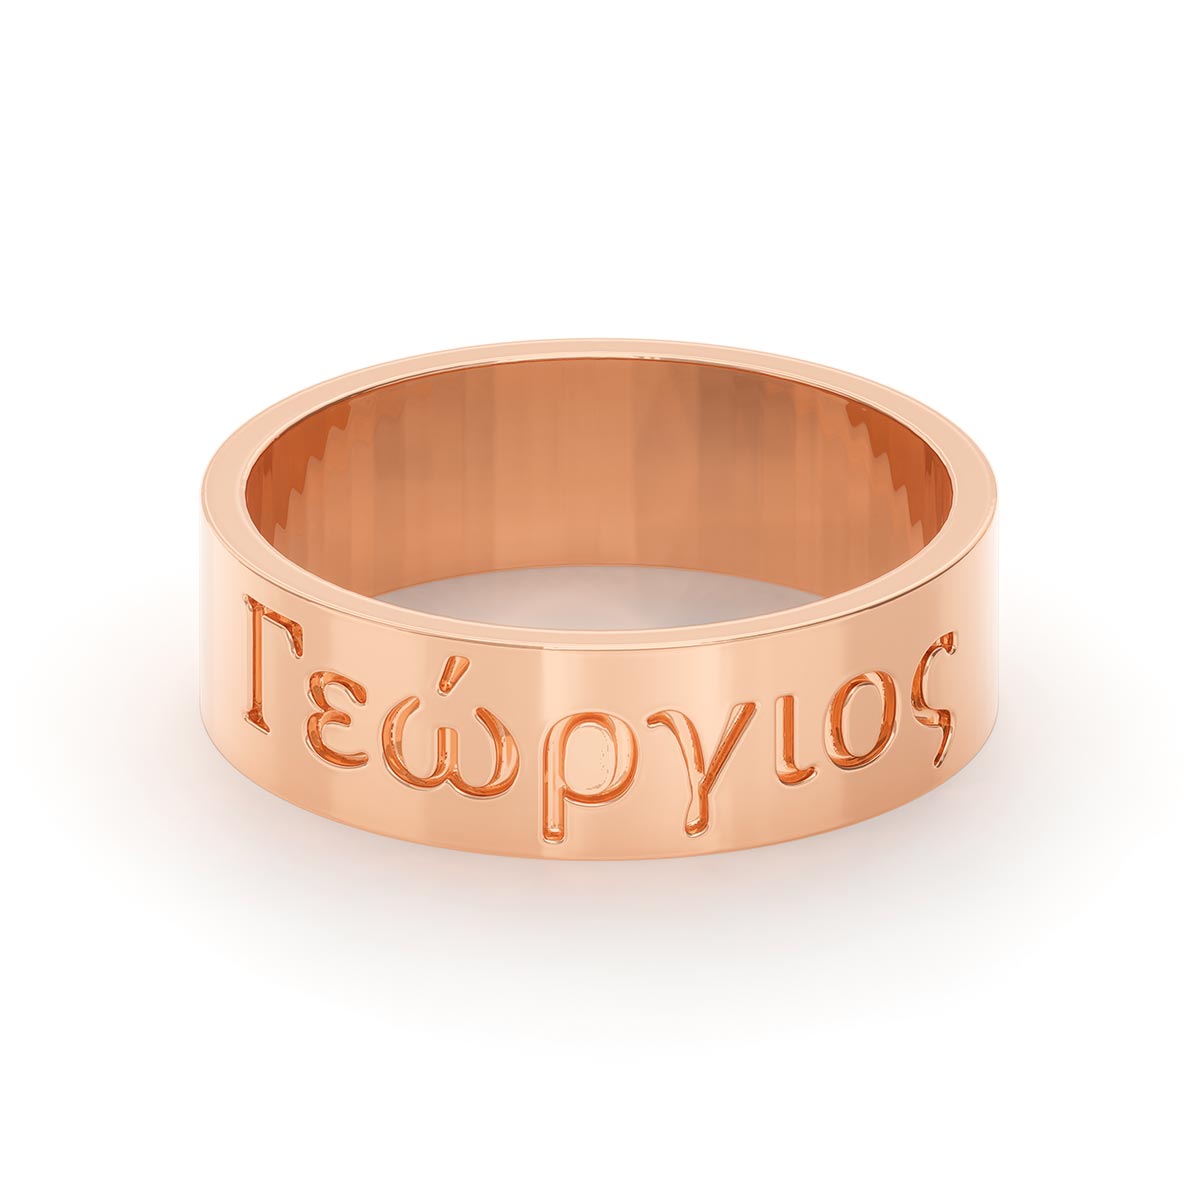 Men's Wide Ring With Greek Name Engraving